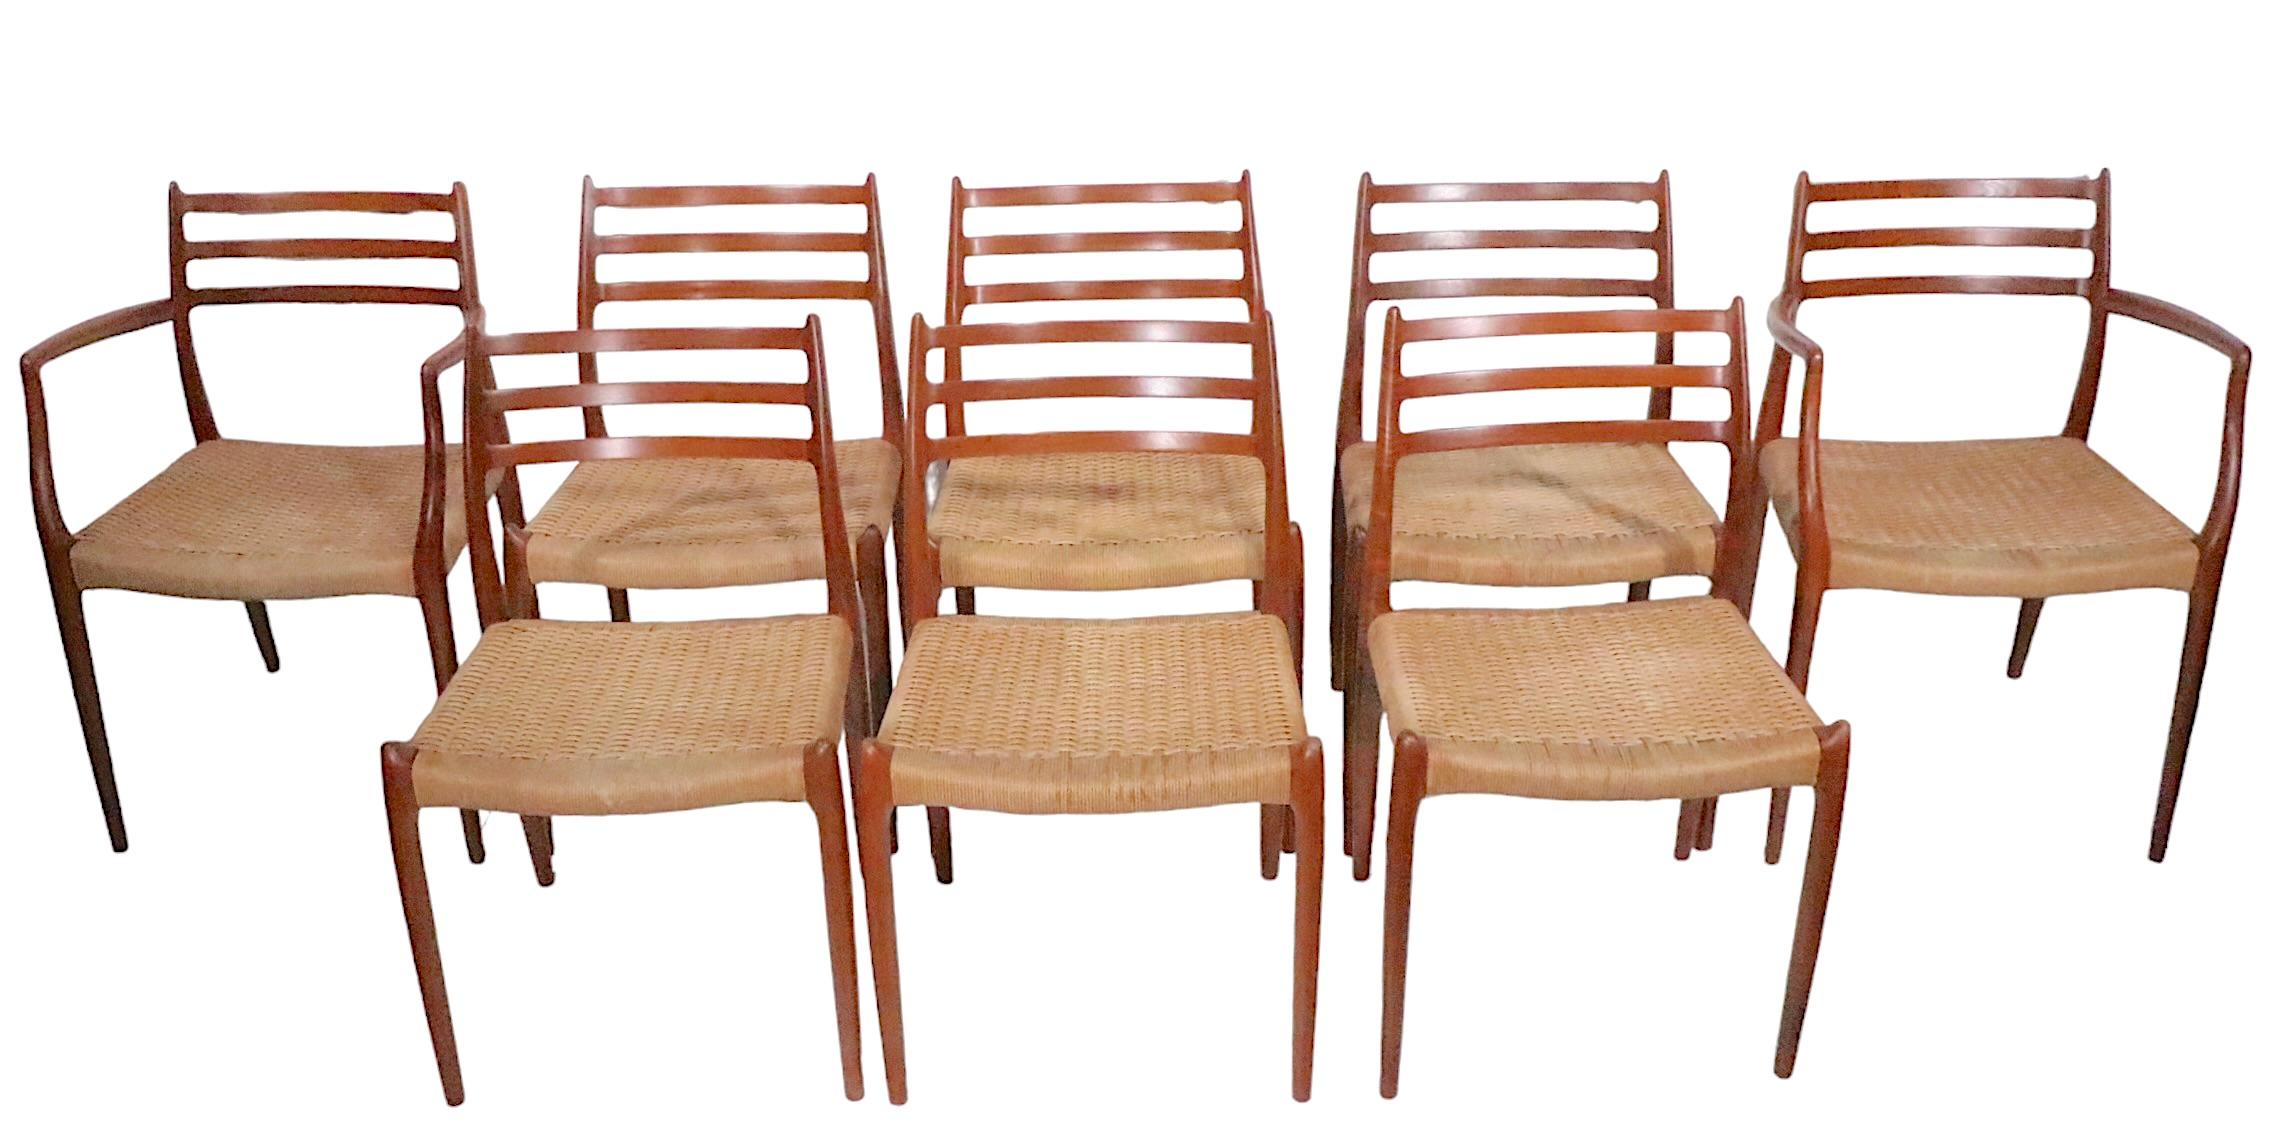 Exceptional set of eight dining chairs designed by Niels Otto Moller, made in Denmark by J.L.Moller Mobelfabrik circa 1960's. The set consists of two arm chairs ( model 62 ) and six side chairs ( model 78 ). The chairs have solid teak frames with